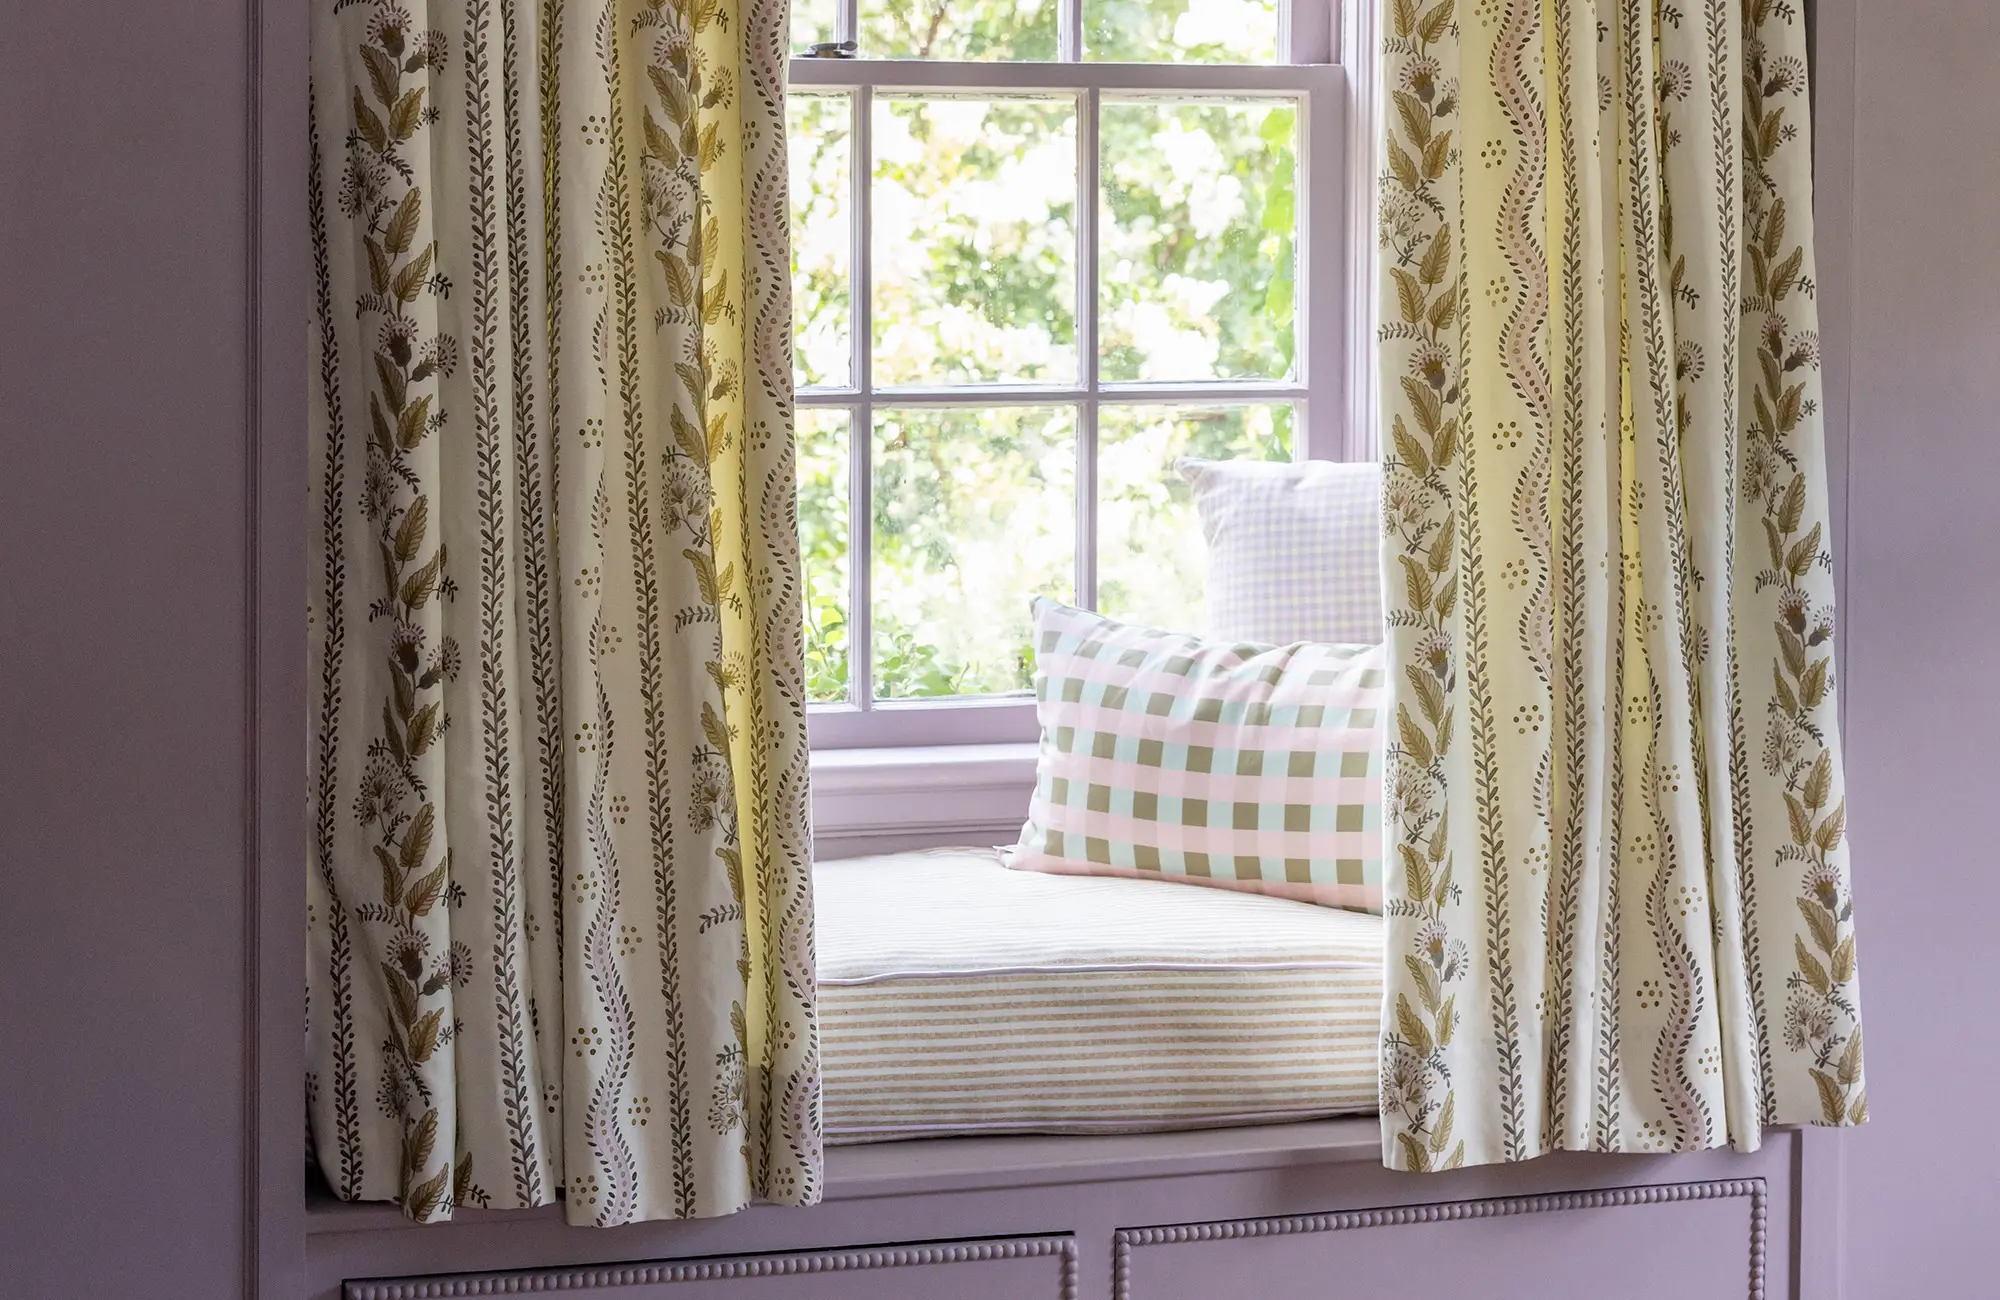 Window seat with curtains, pillows, and cushion